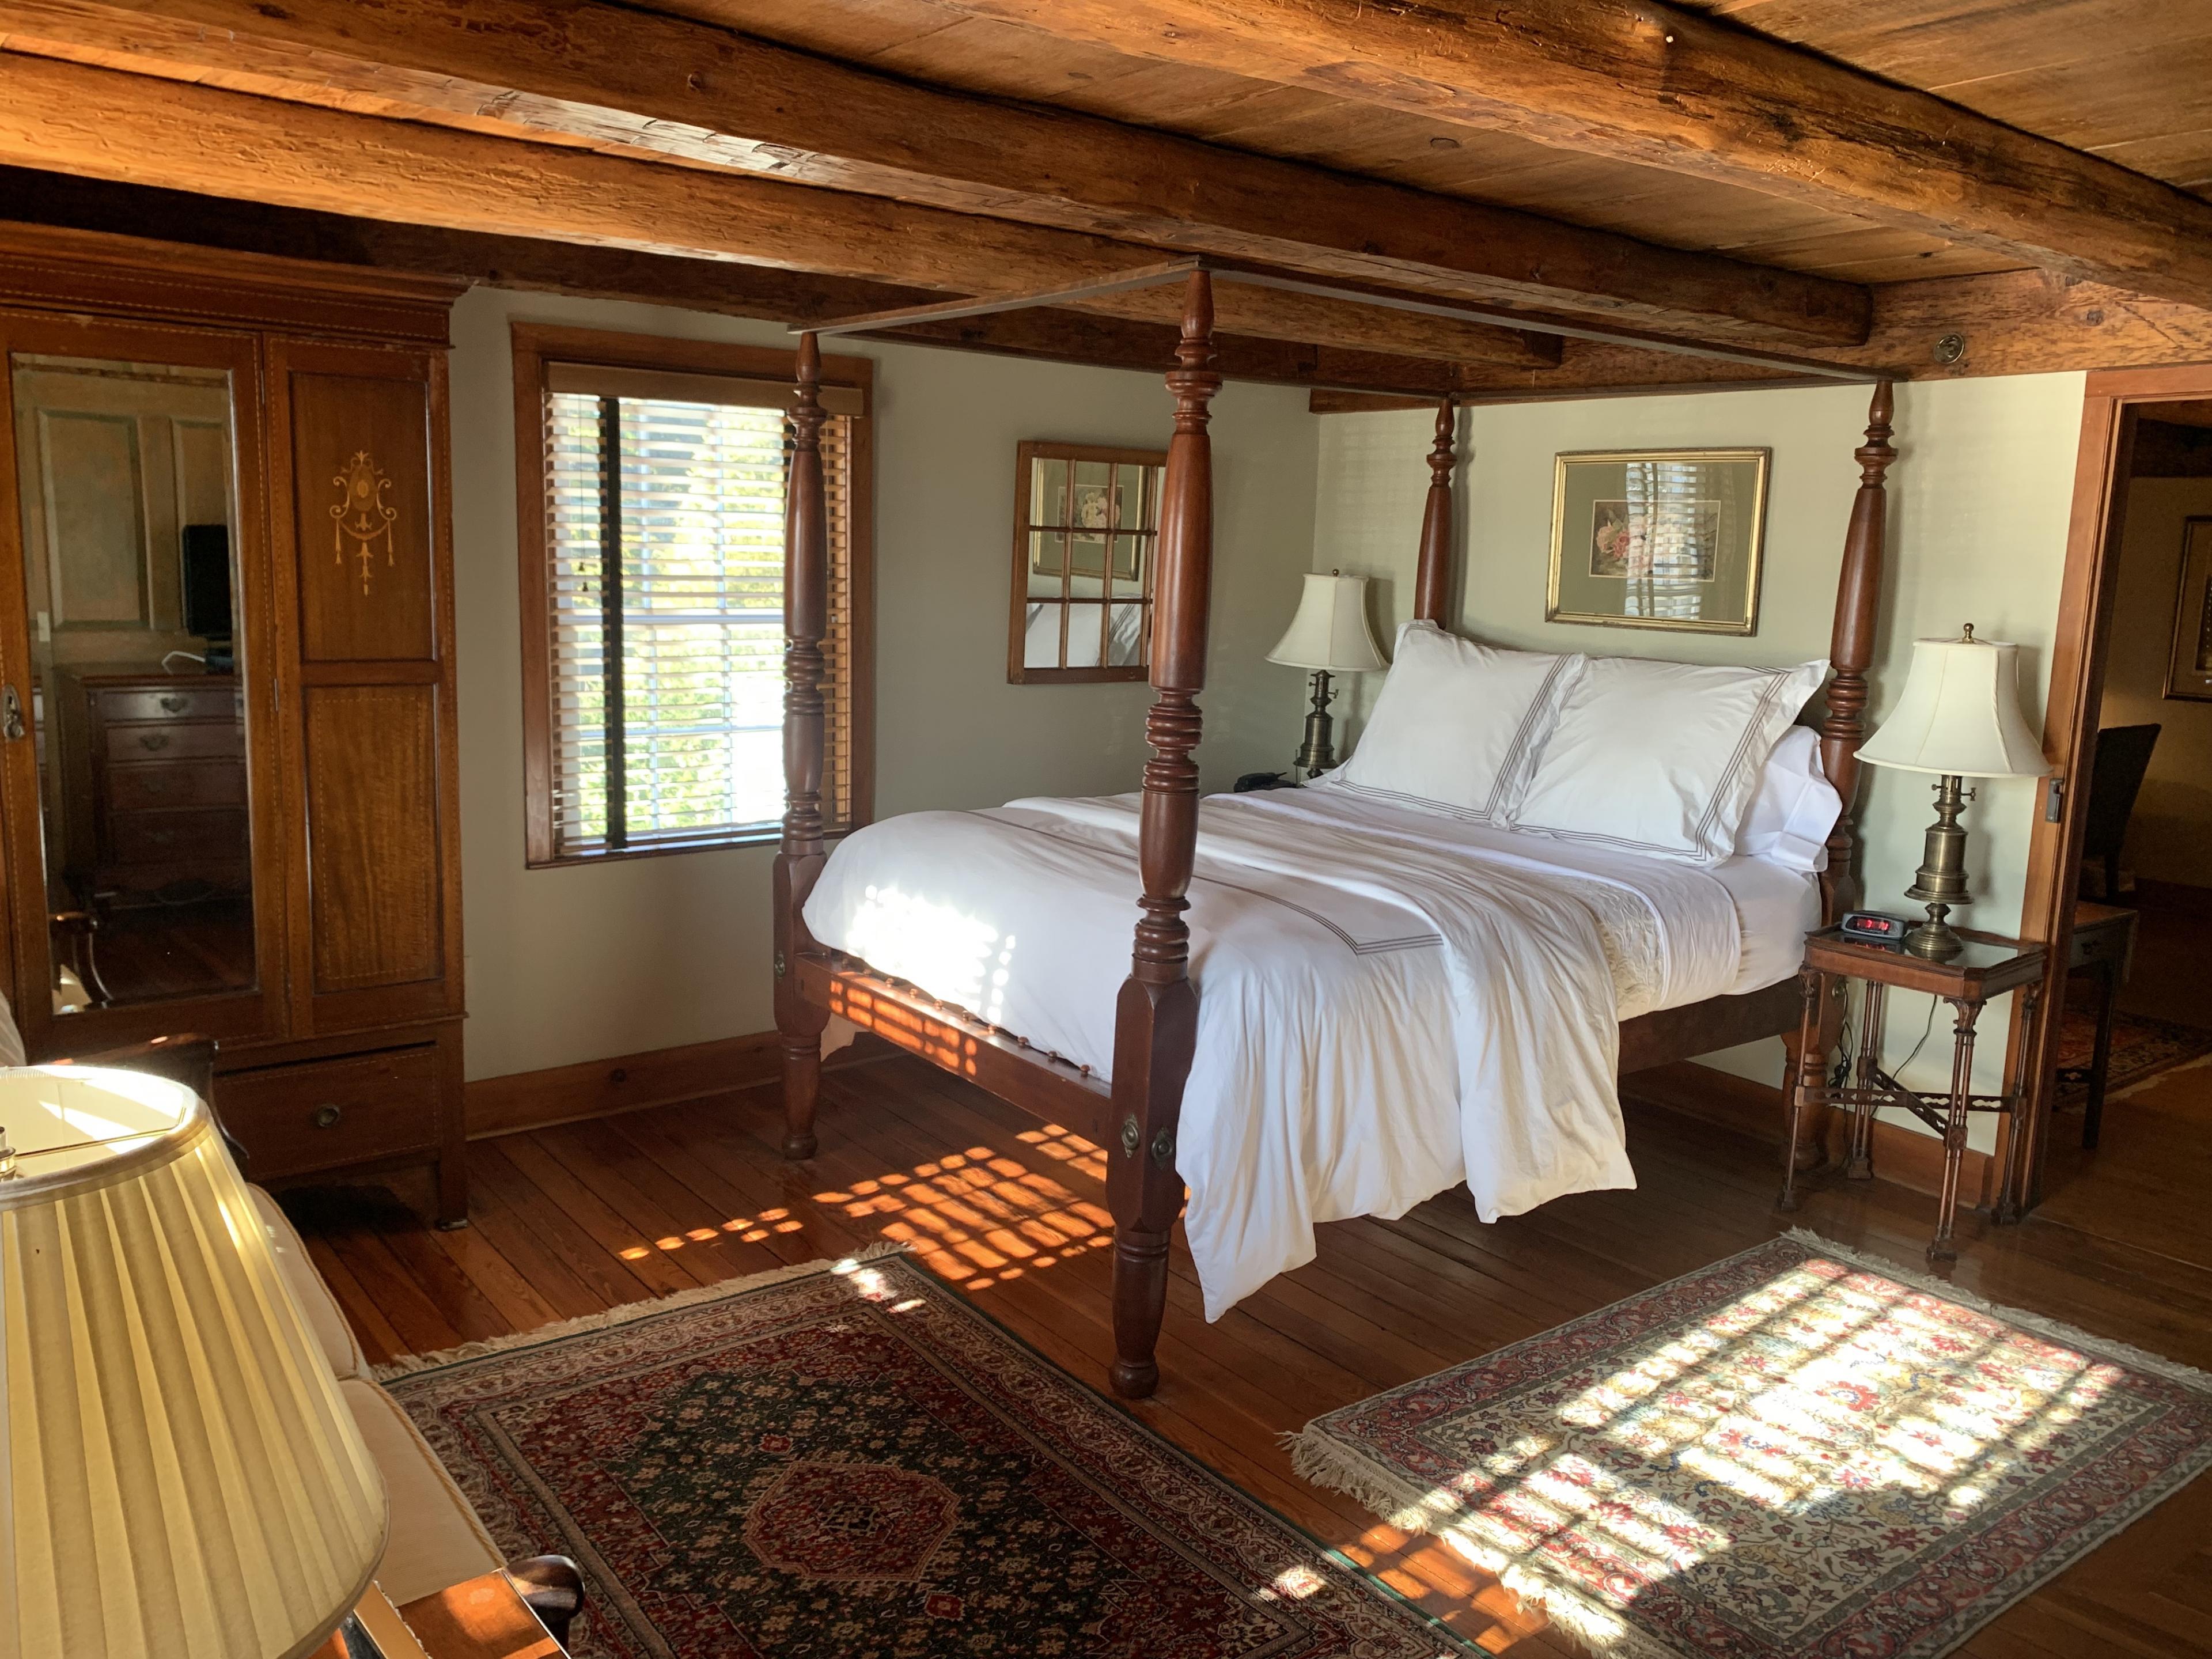 hotel bedroom in traditional old american style with wooden beamed ceiling, four poster wooden bed with white linens